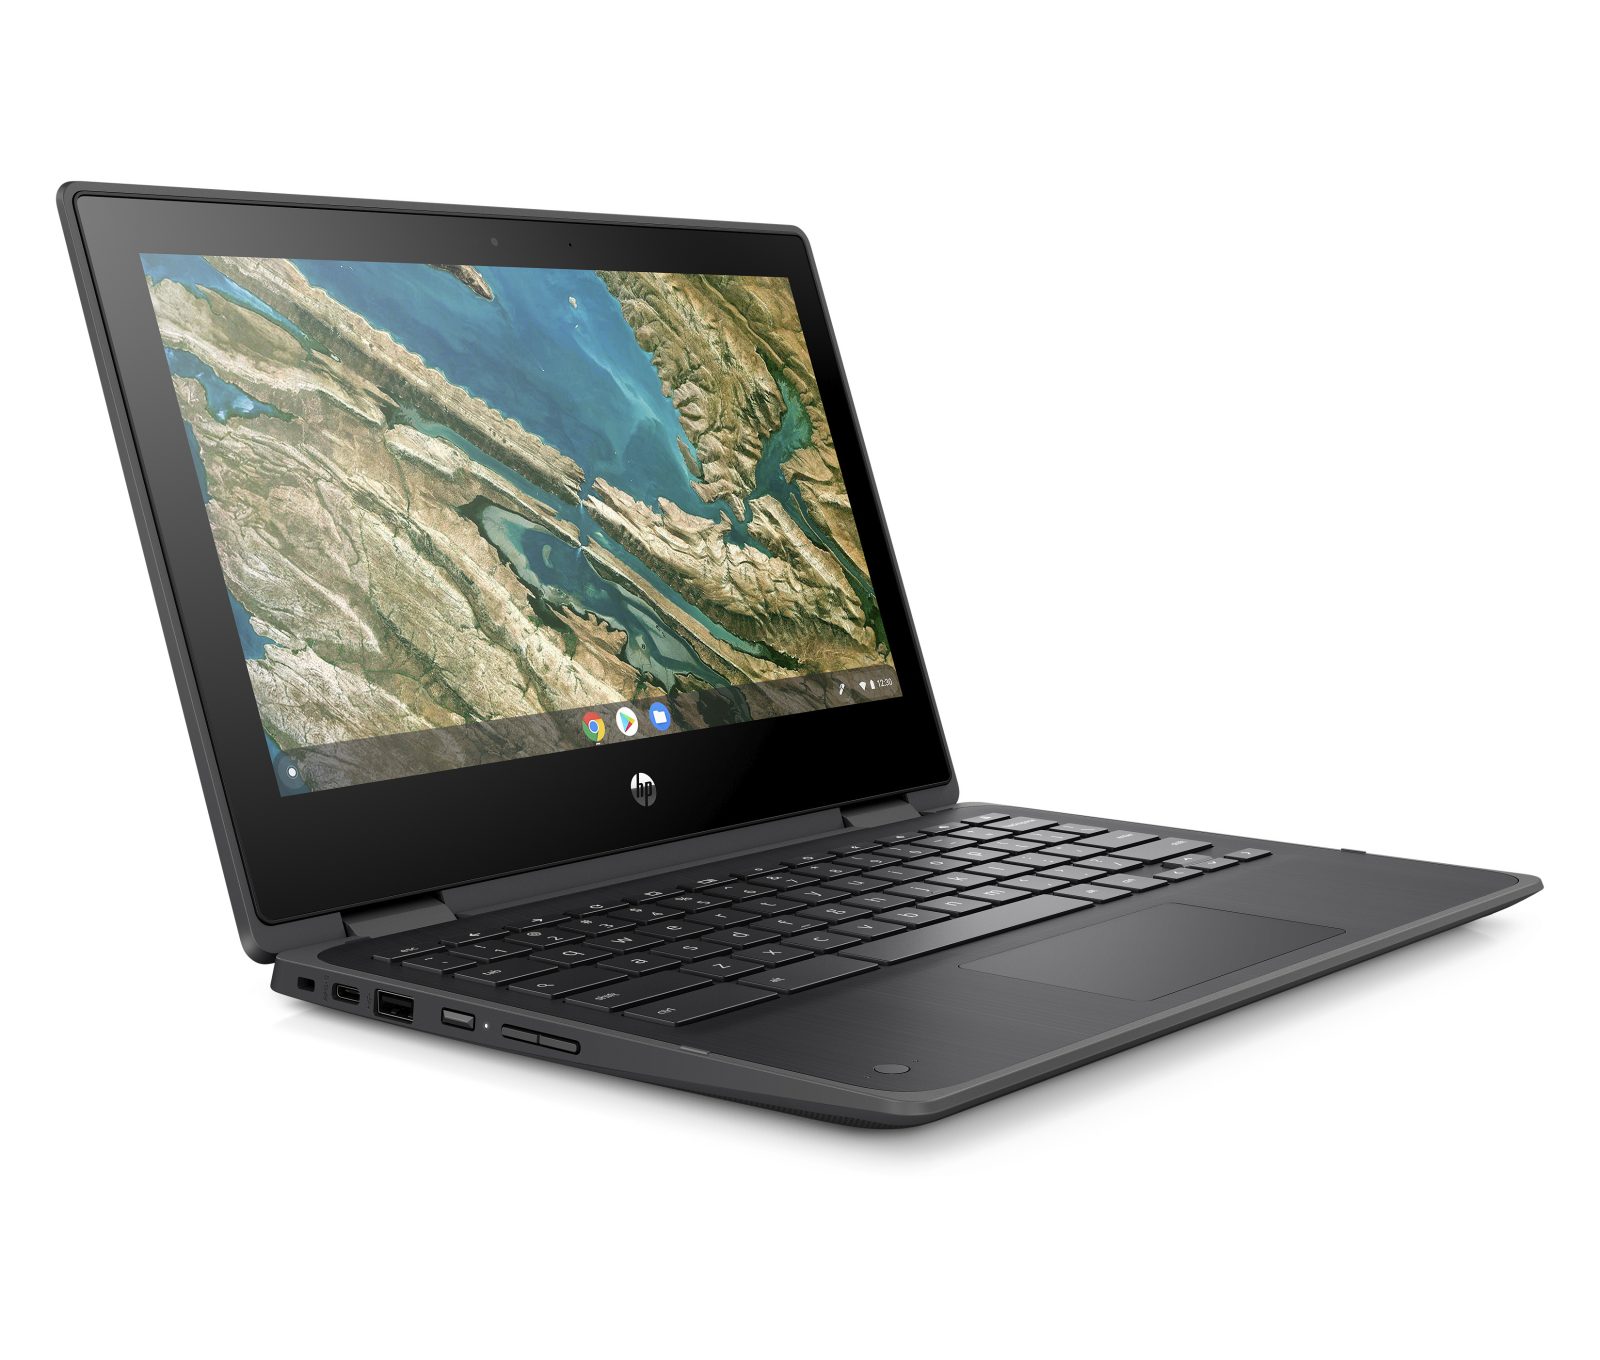 HP: Introducing the new Fortis PCs suitable for business and education